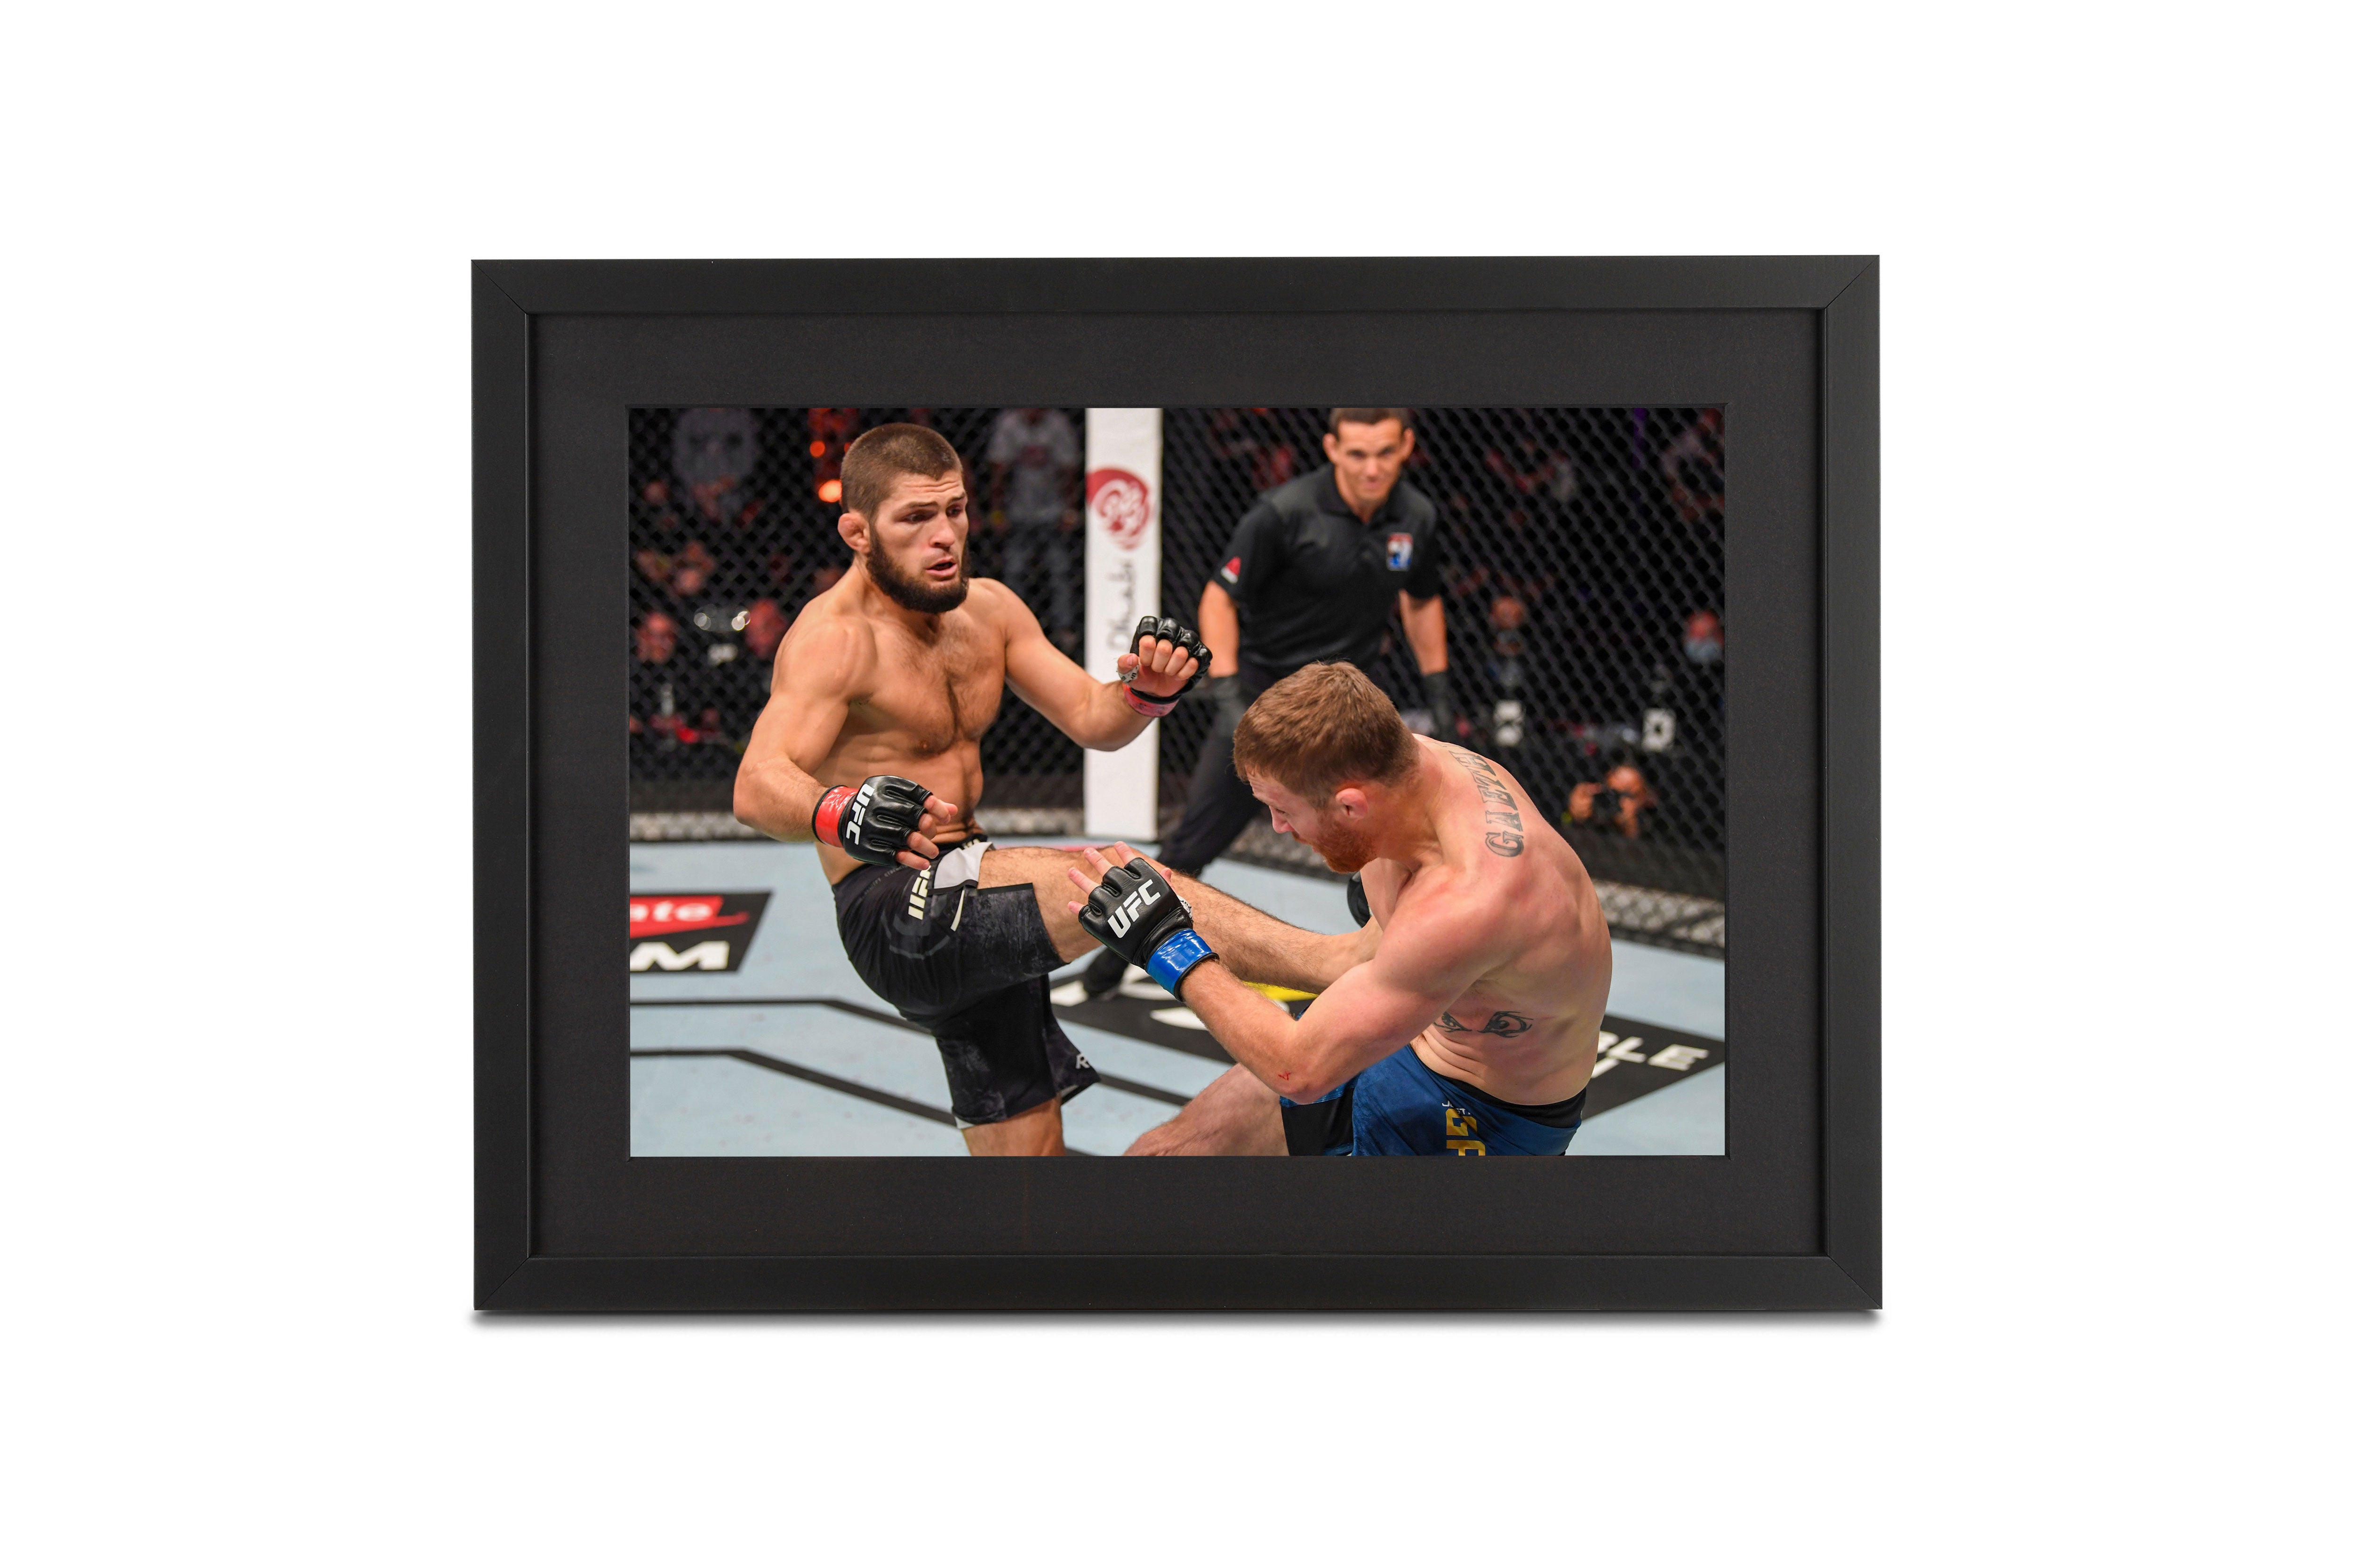  HWC Trading UFC 229 Fight Khabib Nurmagomedov vs Conor McGregor  16 x 12 inch Framed Gifts Printed Signed Autograph Picture for UFC  Memorabilia Fans - 16 x 12 Framed : Sports & Outdoors